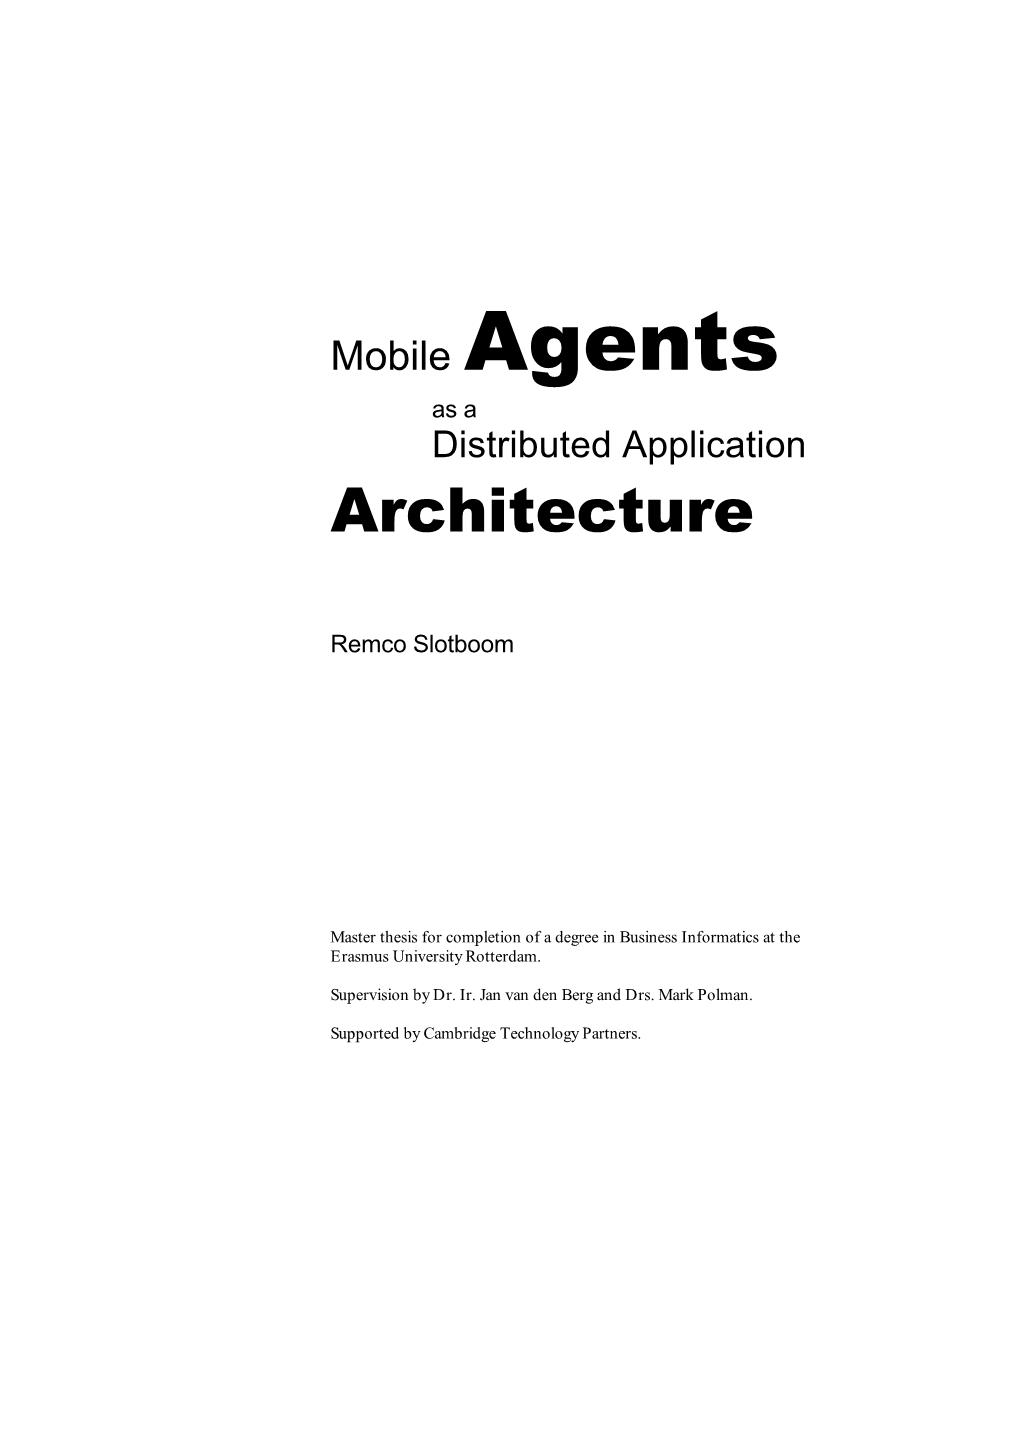 Distributed Application Architecture